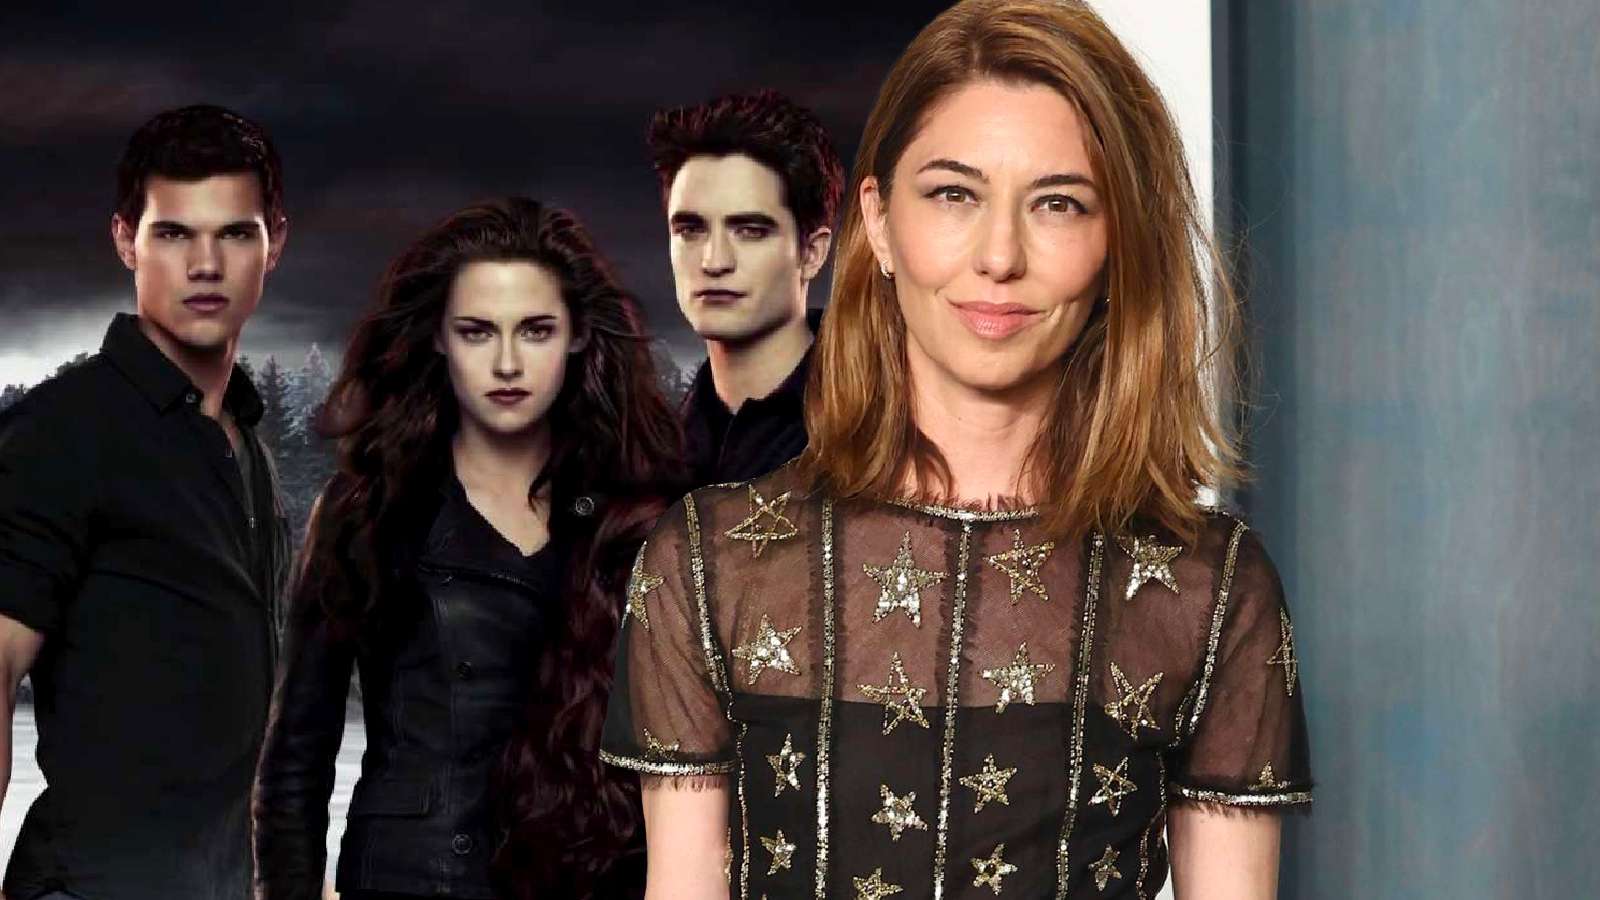 Twilight Breaking Dawn character and director Sofia Coppola